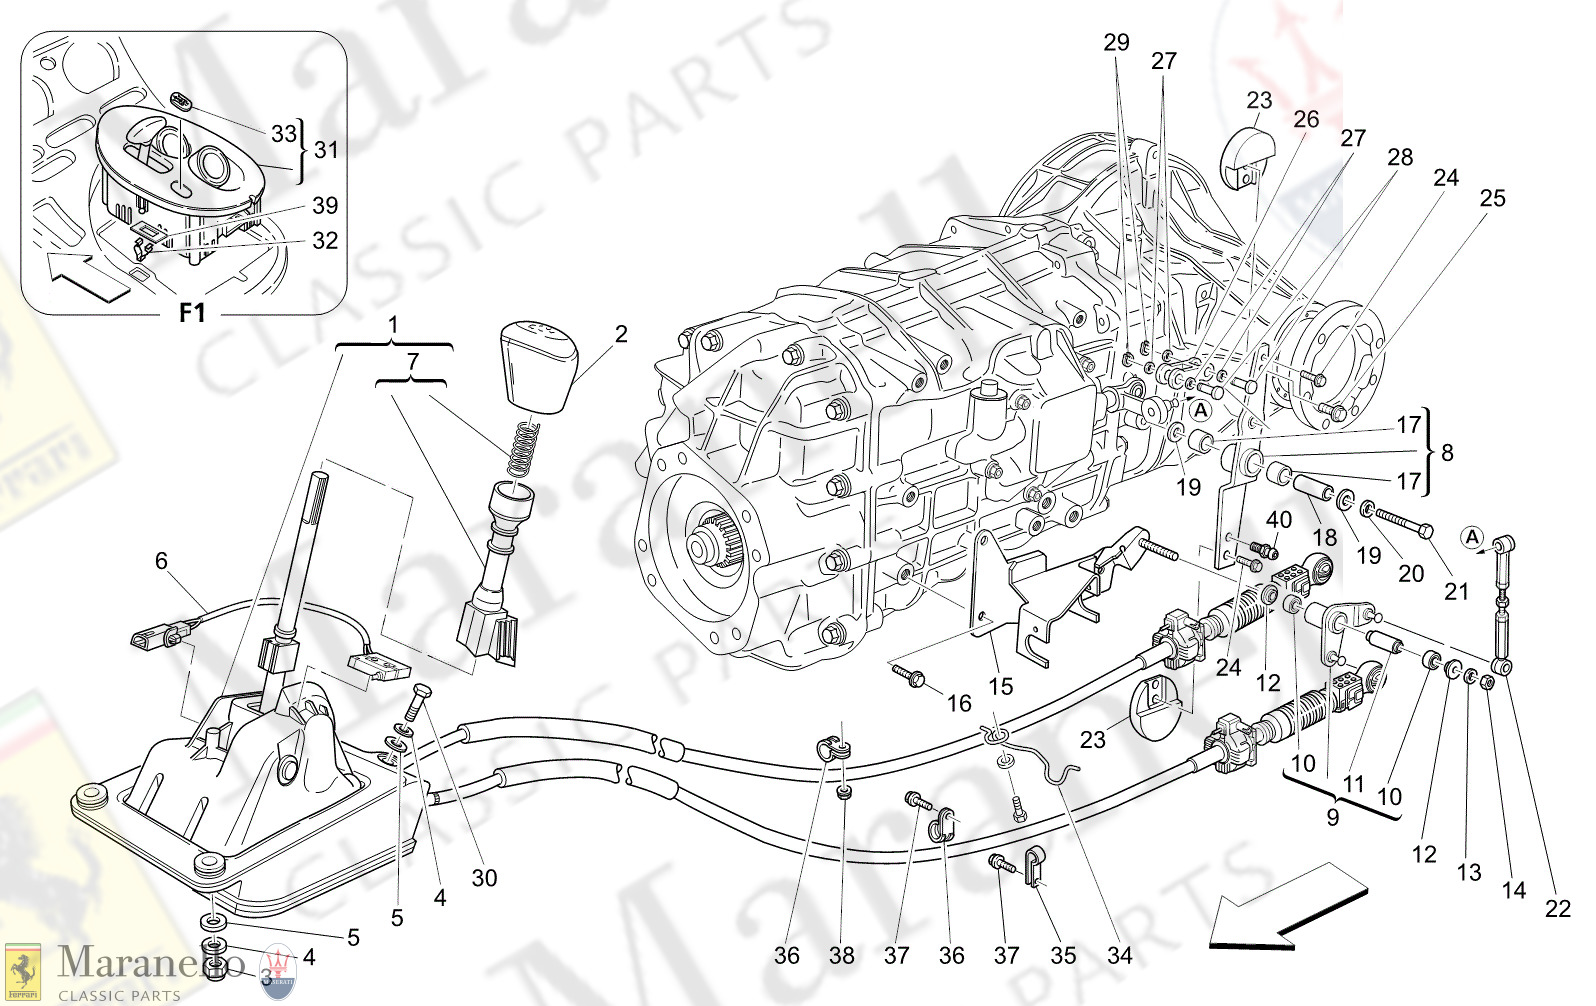 M3.03 - 14 - M303 - 14 Driver Controls For Gearbox